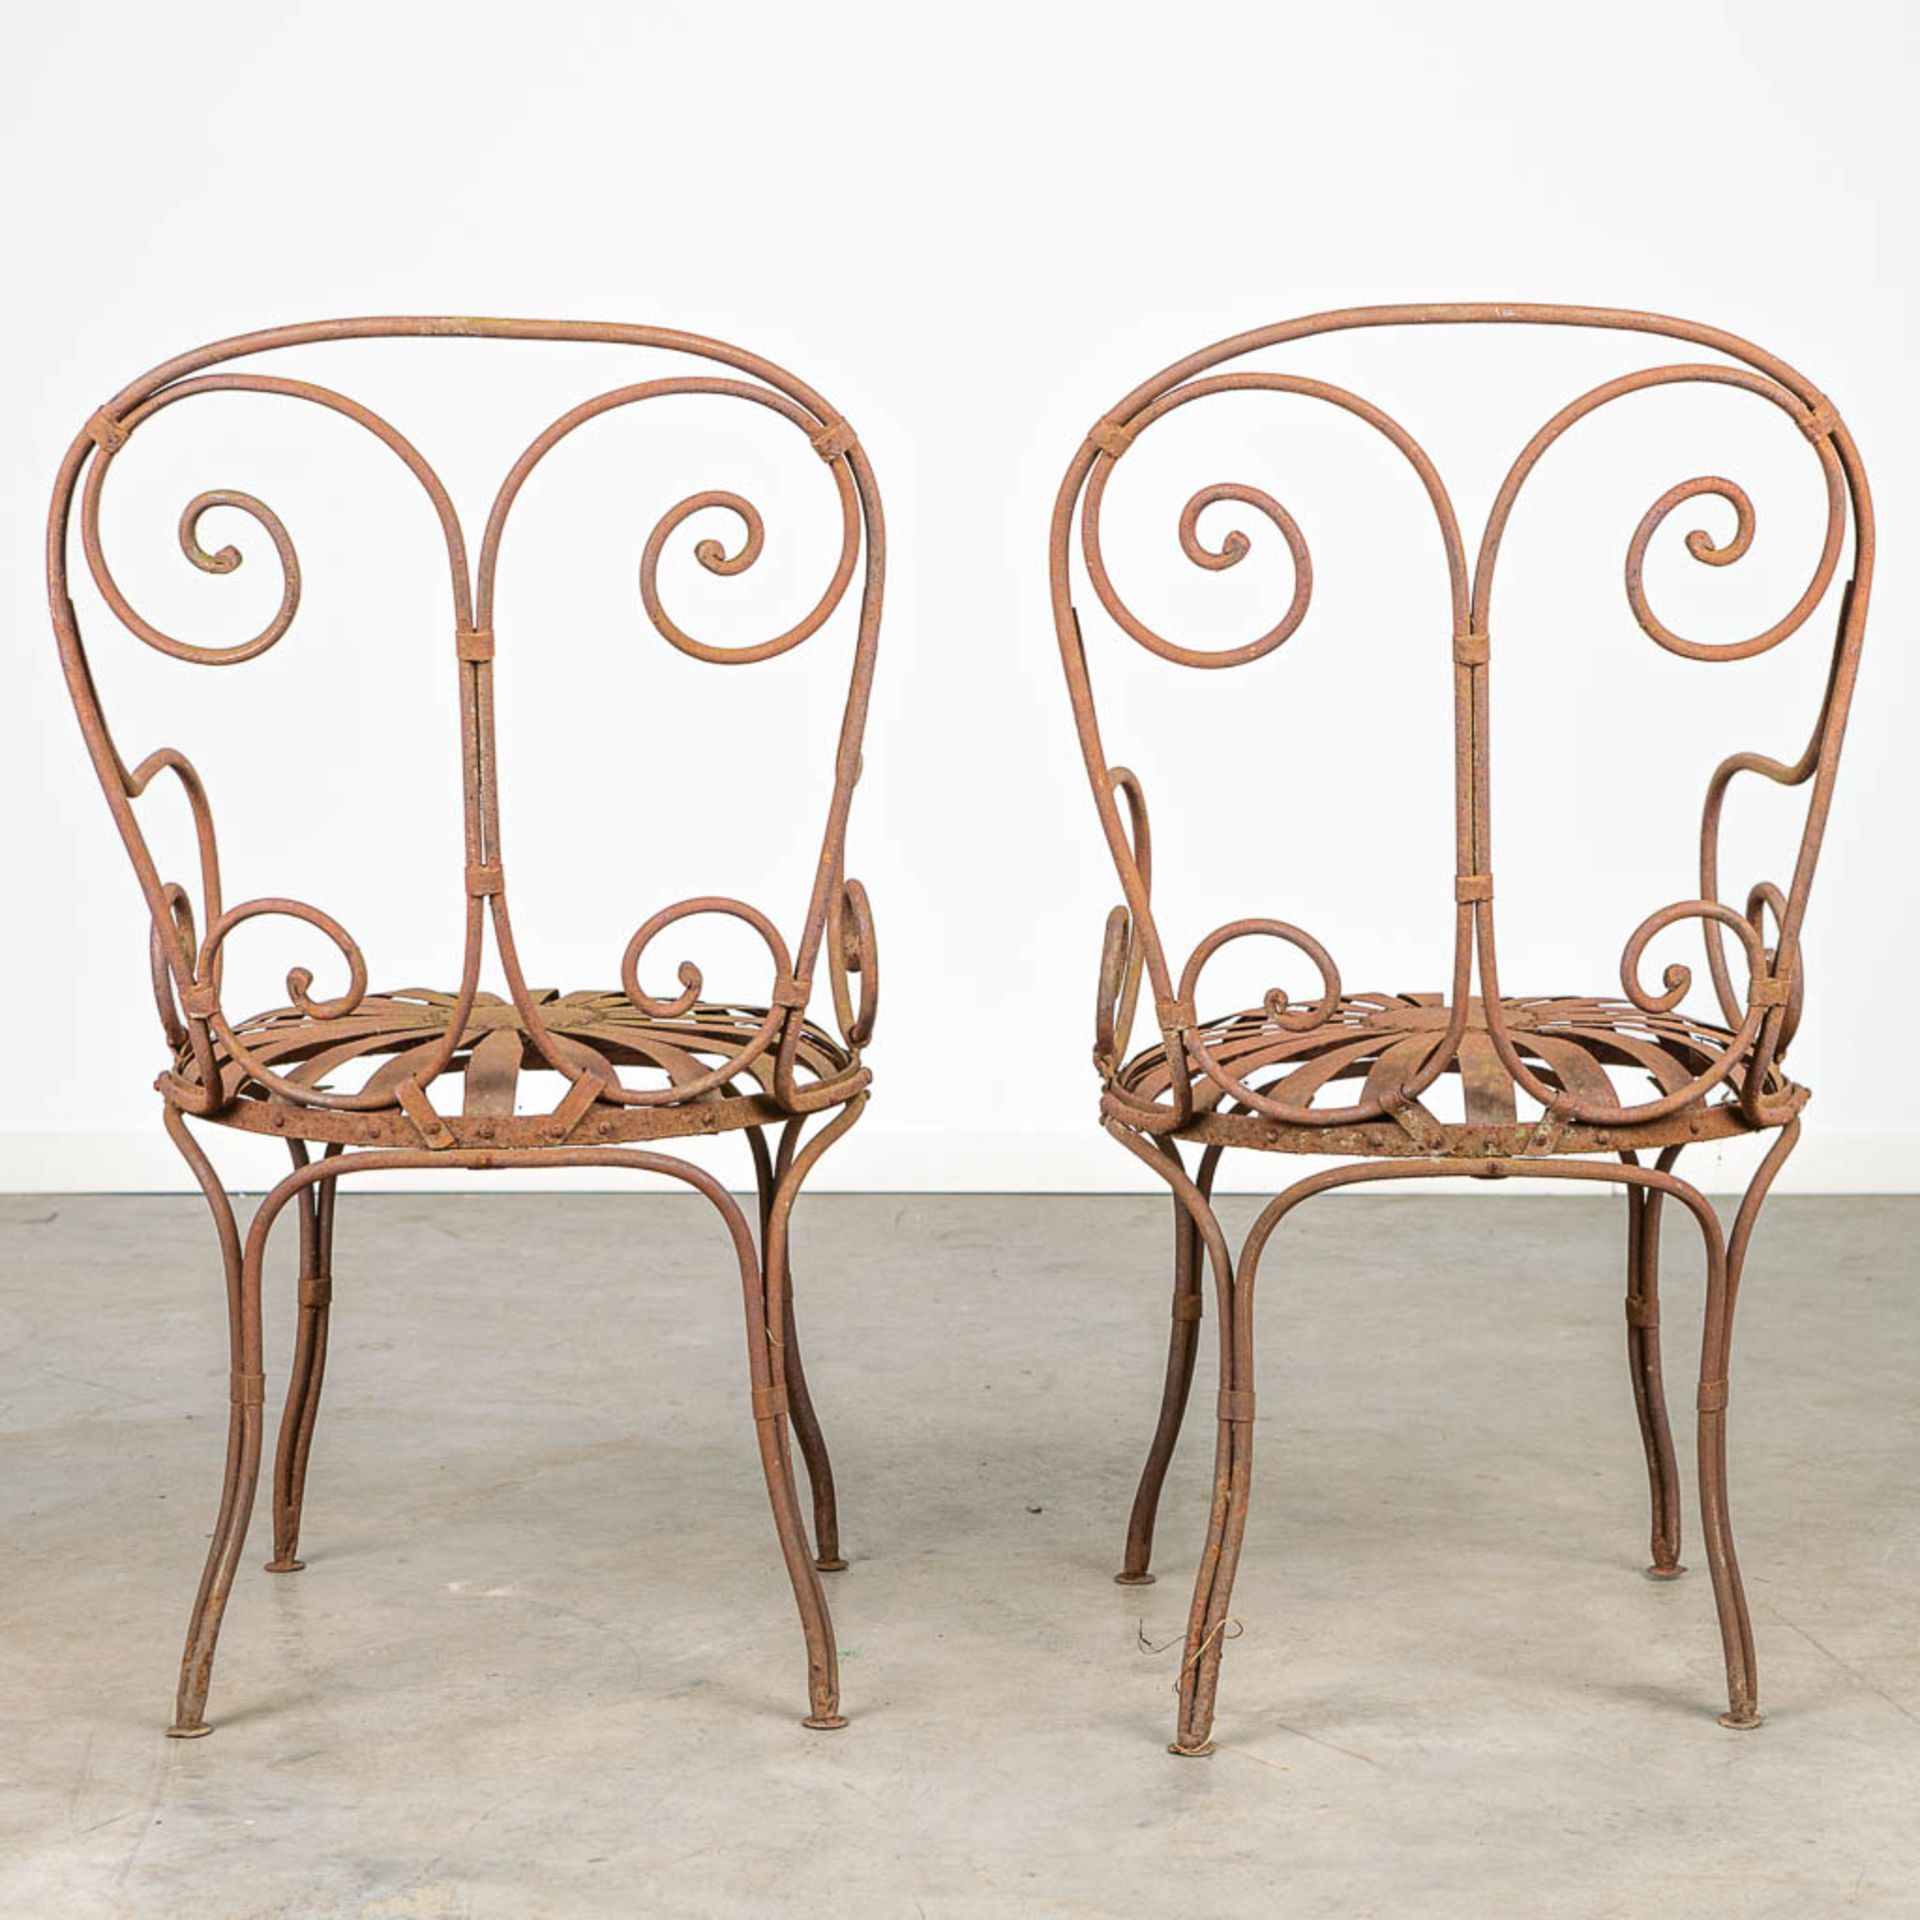 A pair of garden chairs made of wrought iron. - Image 4 of 6